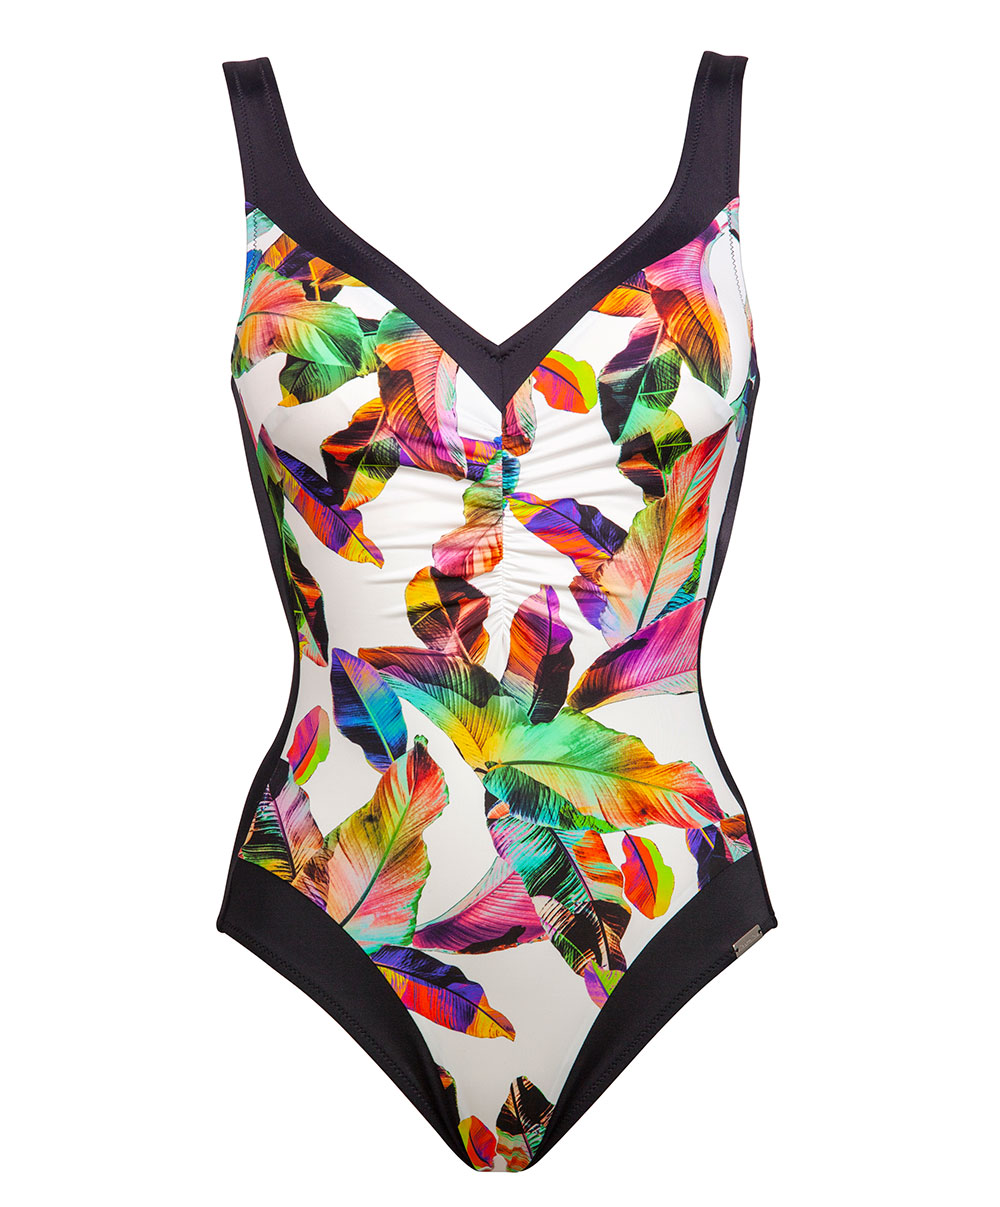 One piece body shaping swimsuit underwired Parrot Bay white multicolor ...